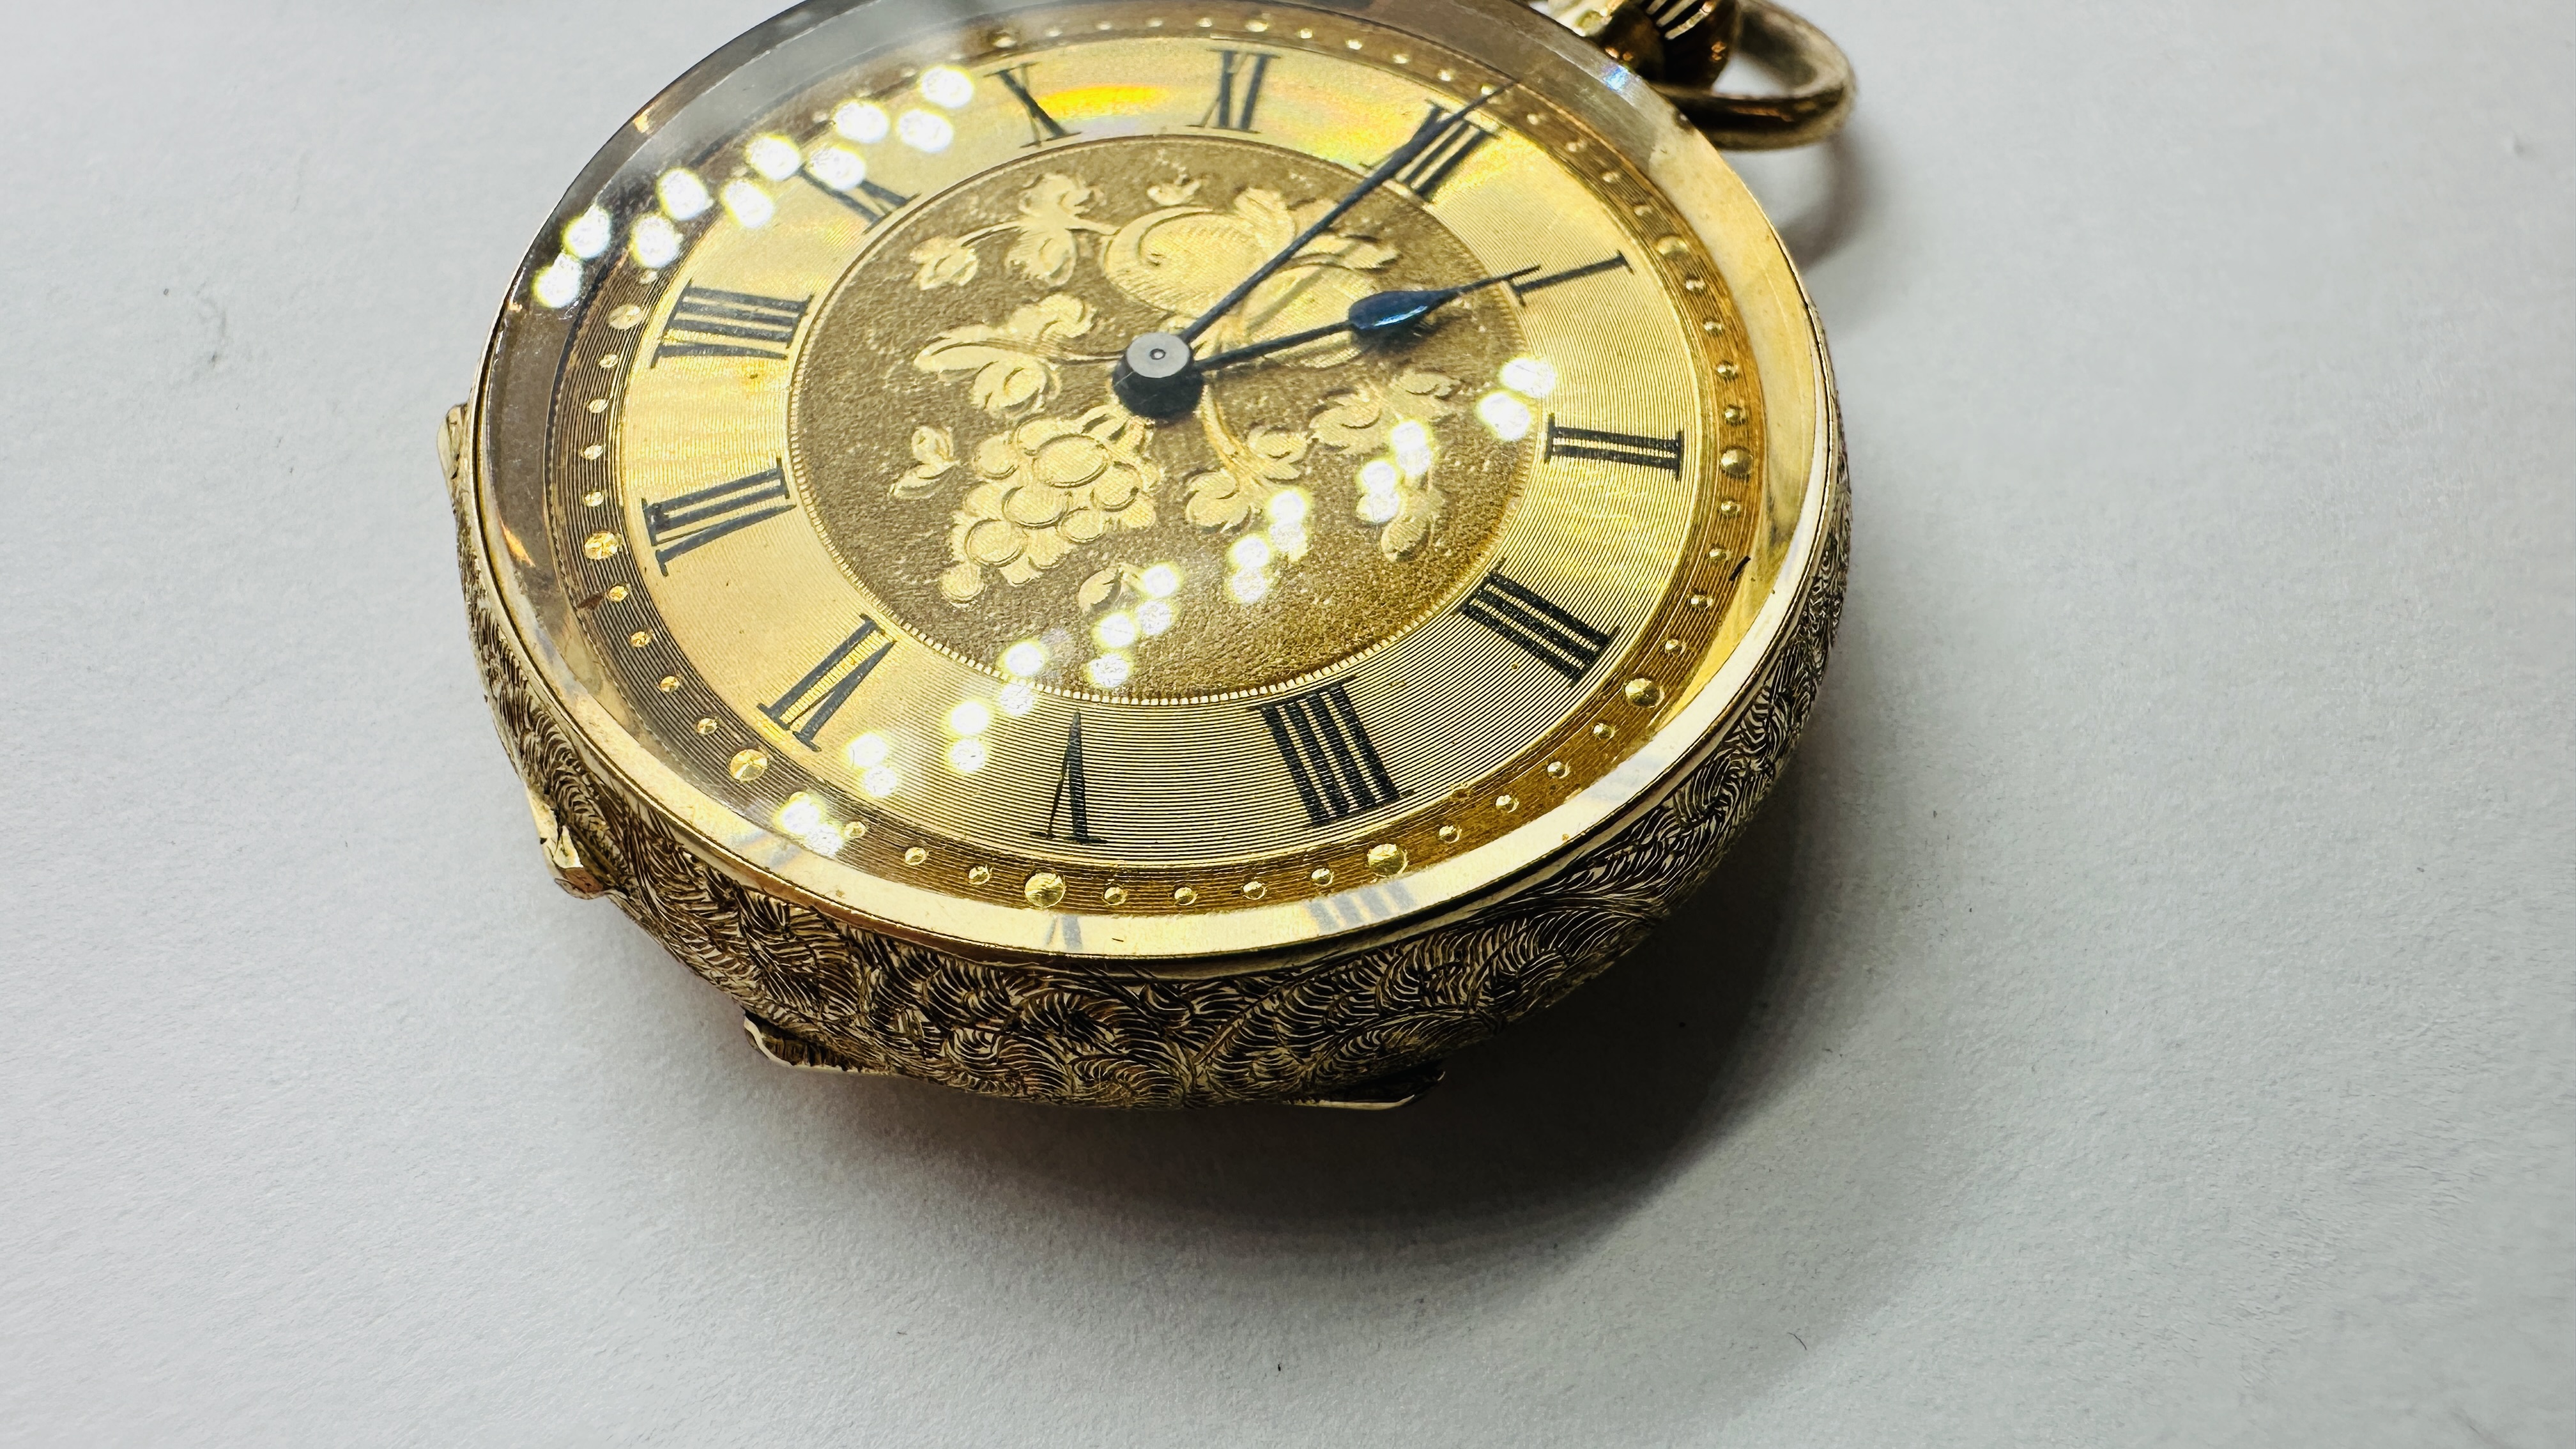 AN ELABORATE ANTIQUE 18CT GOLD CASED HALF HUNTER POCKET WATCH ALONG WITH A WOVEN WATCH CHAIN, - Image 14 of 17